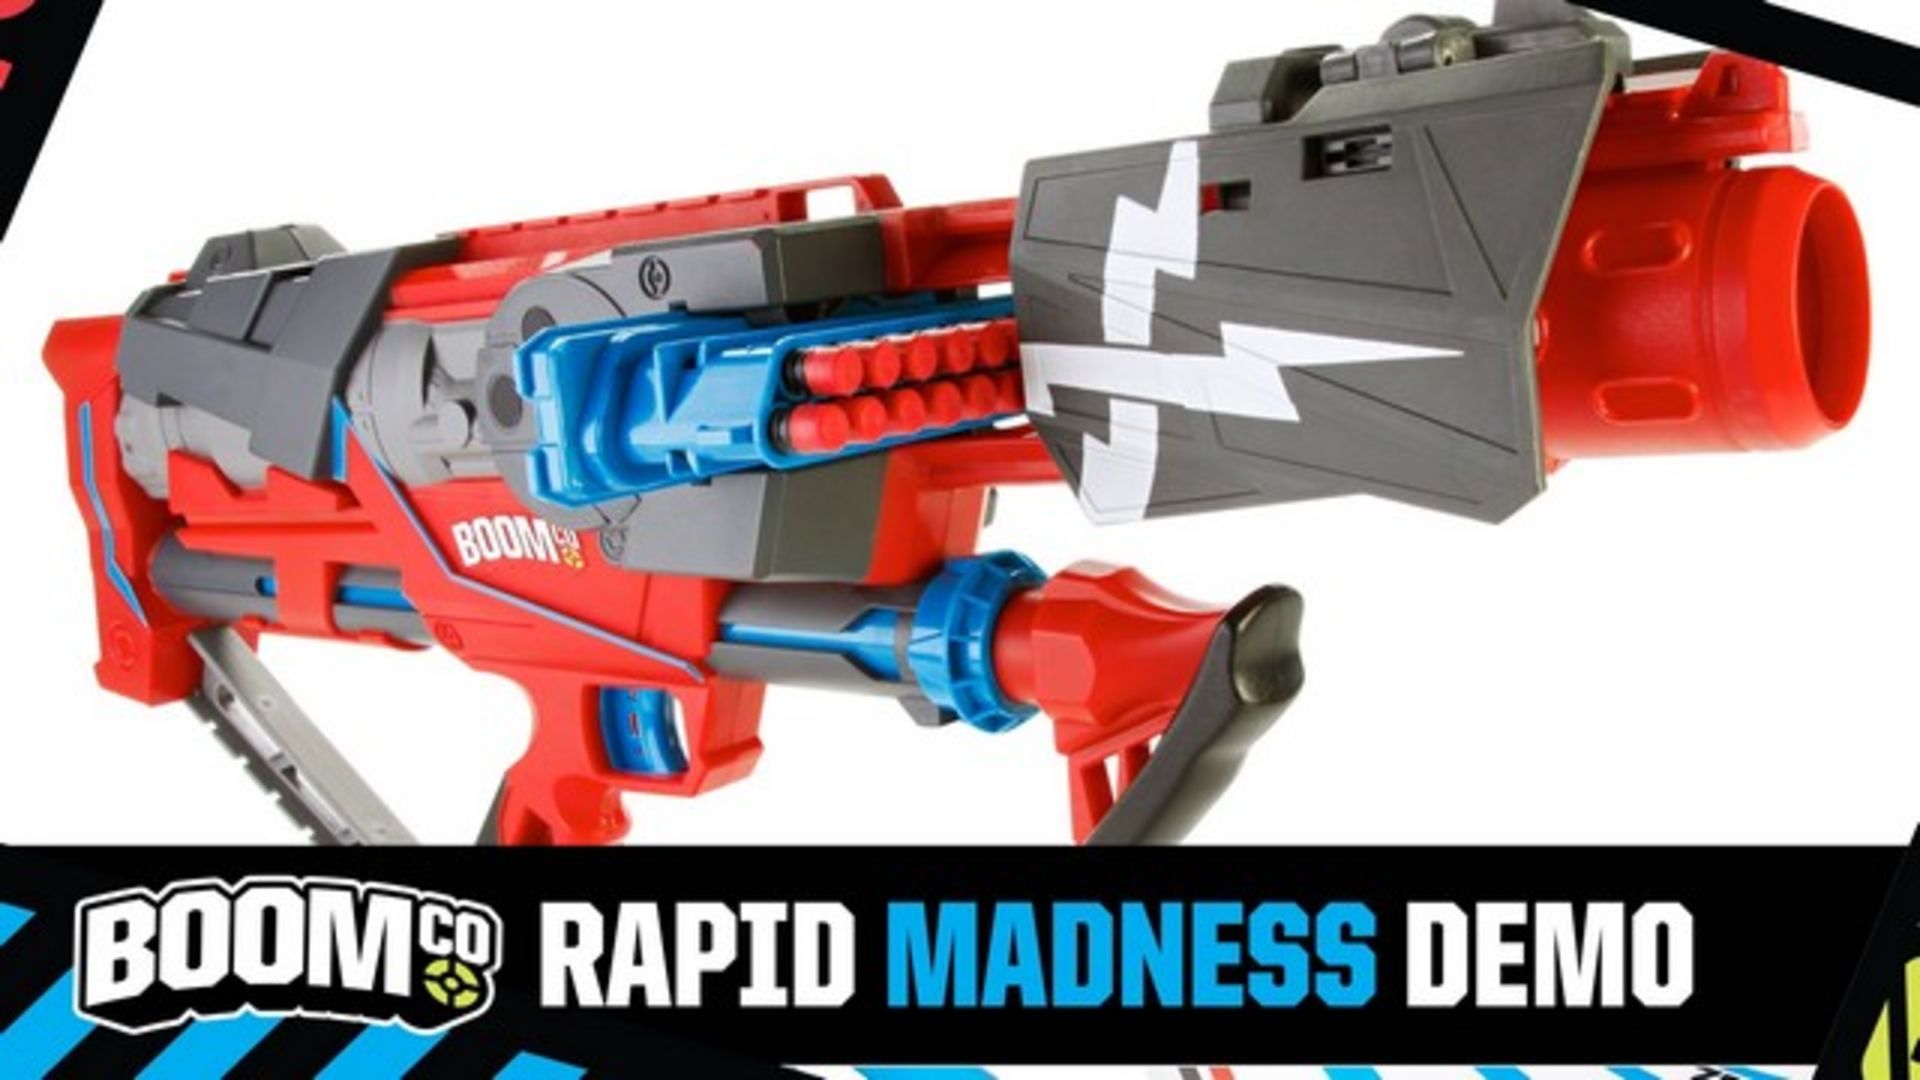 V Brand New BOOMco. Rapid madness Blaster Gun Includes Target Mat and Darts ISP - £24.99 Tesco